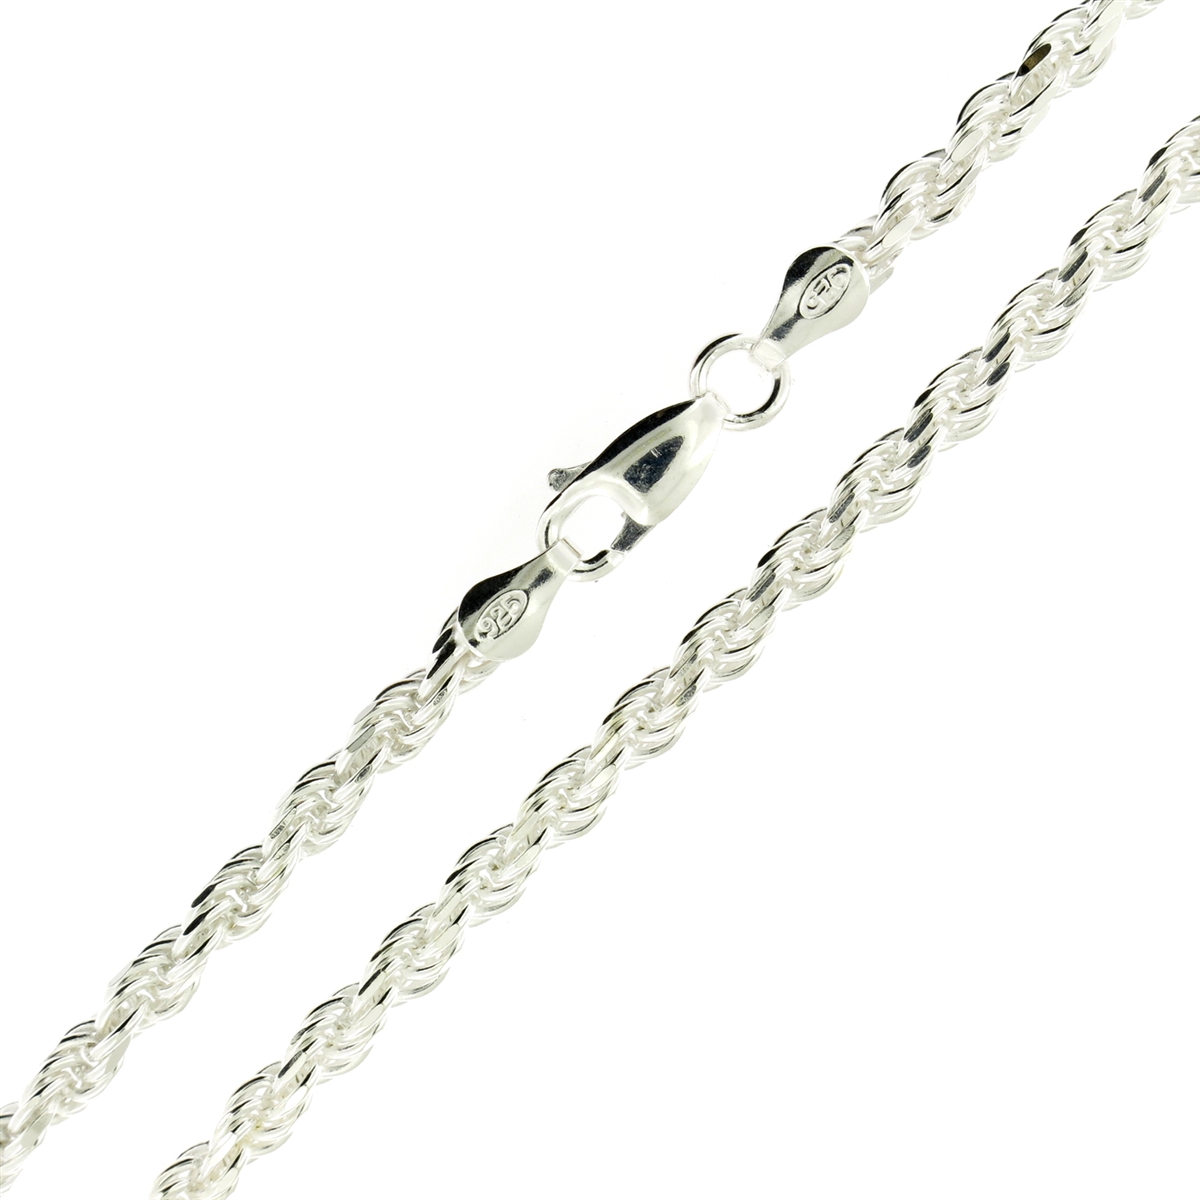 Black Silver Star Link Chain, Oxidized Solid Silver Necklace, 925 Sterling  Silver, Artisan Chain, Unique Hand-crafted Chain Necklace - Etsy | Solid silver  necklace, 925 sterling silver chain, Thick chain necklace